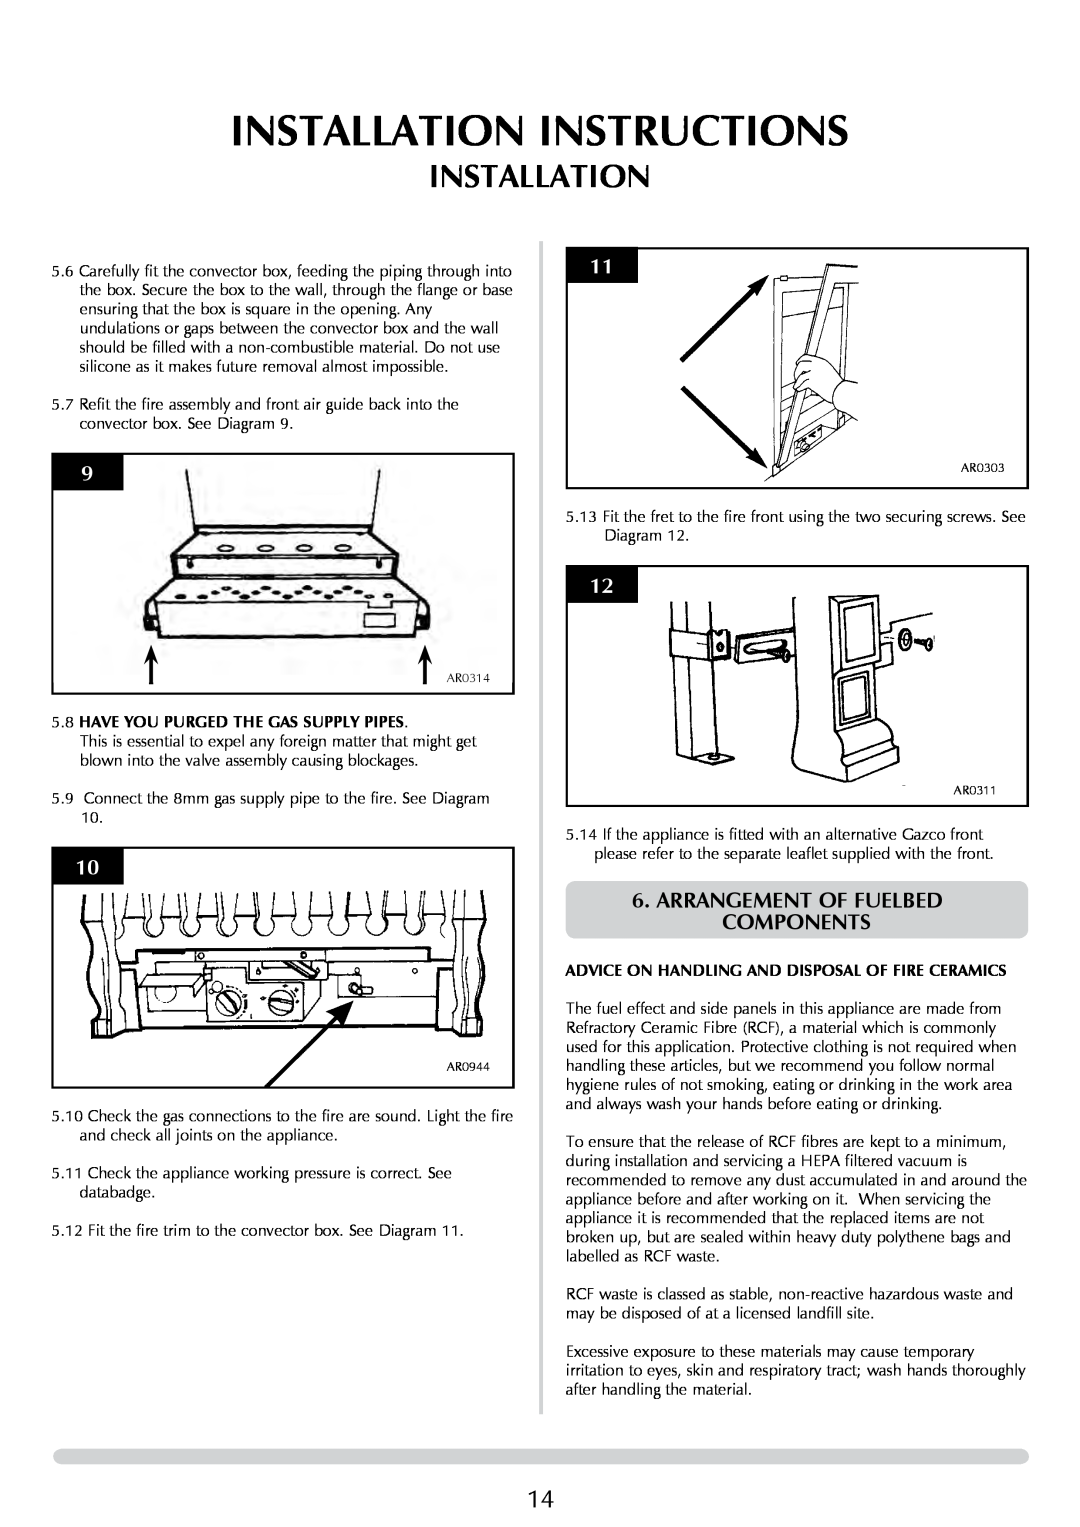 Stovax 8455 manual Installation Instructions, Arrangement Of Fuelbed Components, 5.8HAVE YOU PURGED THE GAS SUPPLY PIPES 